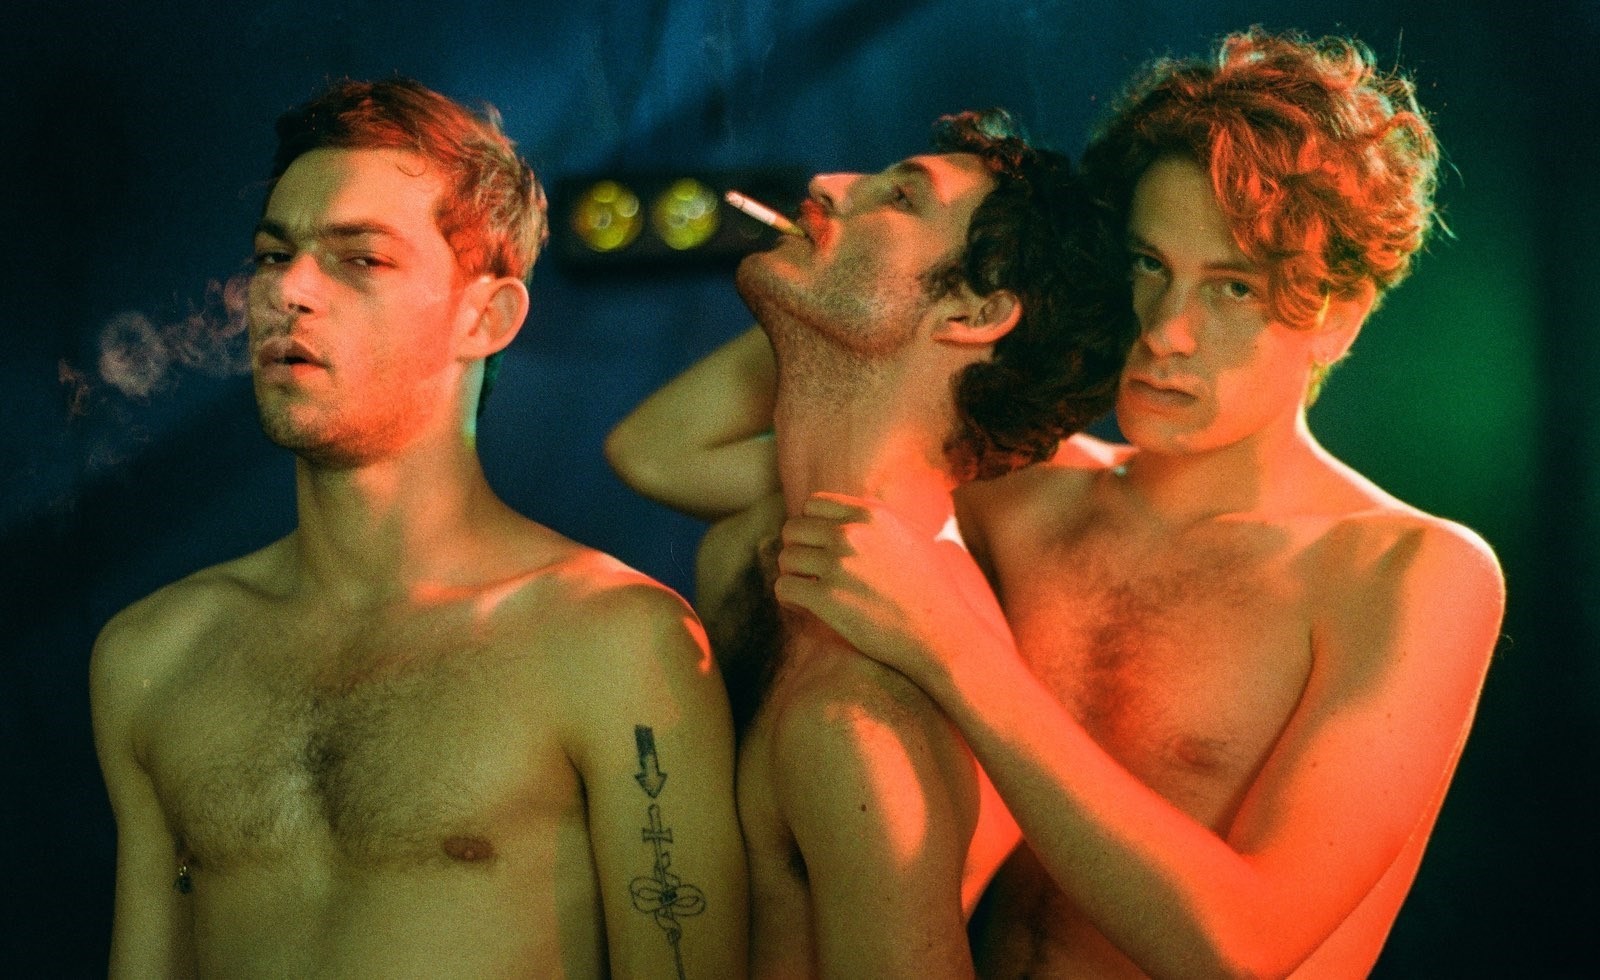 Knife + Heart is the film about murder in the French gay porn industry Dazed